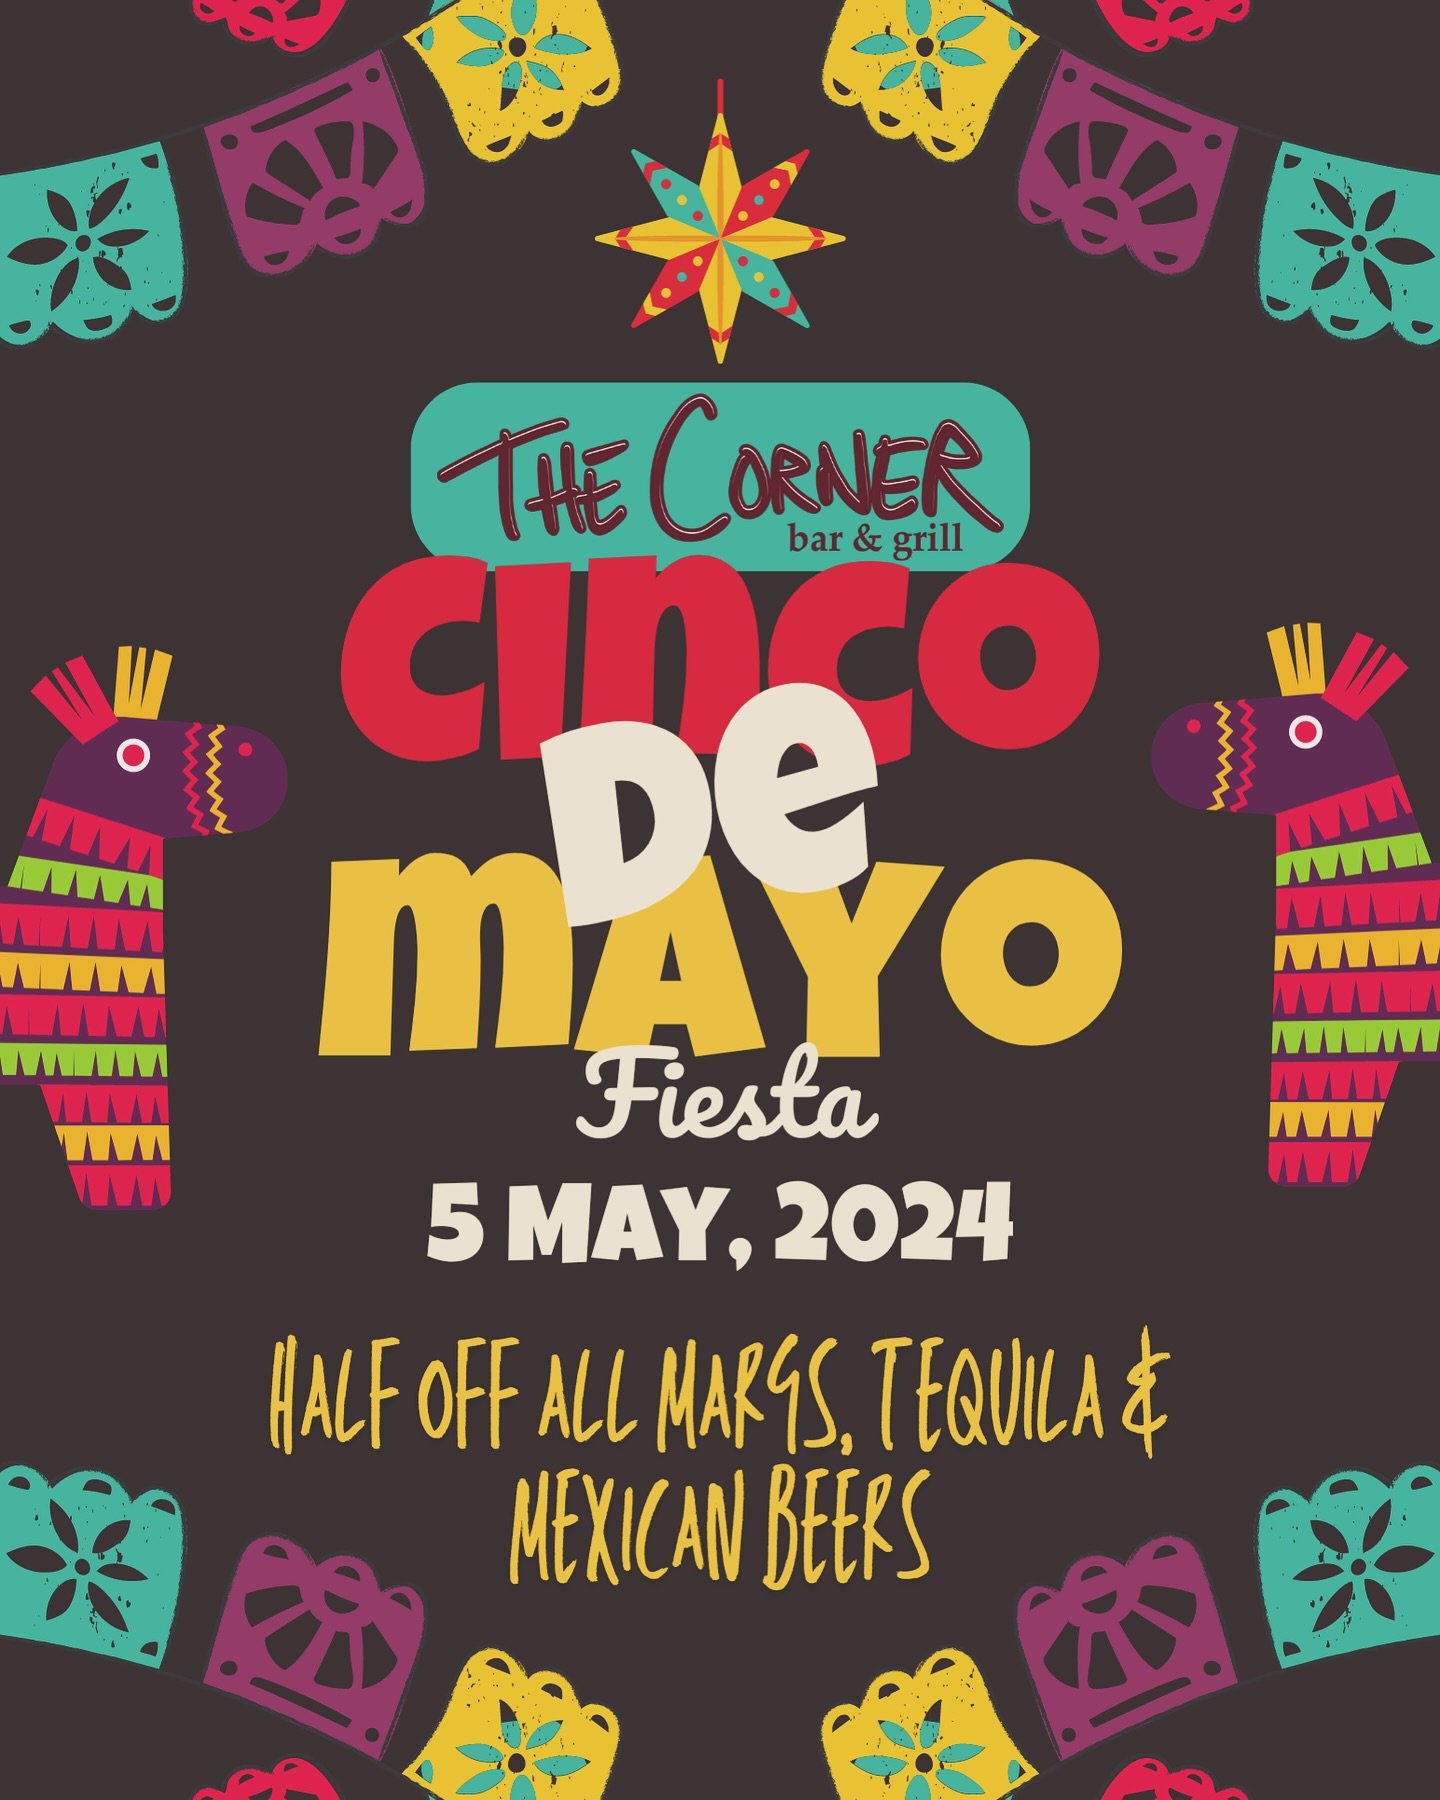 Come get your drinko on with the Corner Crew this Sunday! Half off all margs, tequila, and Mexican beers!🍻 🥳🇲🇽 Doors open at 2pm.